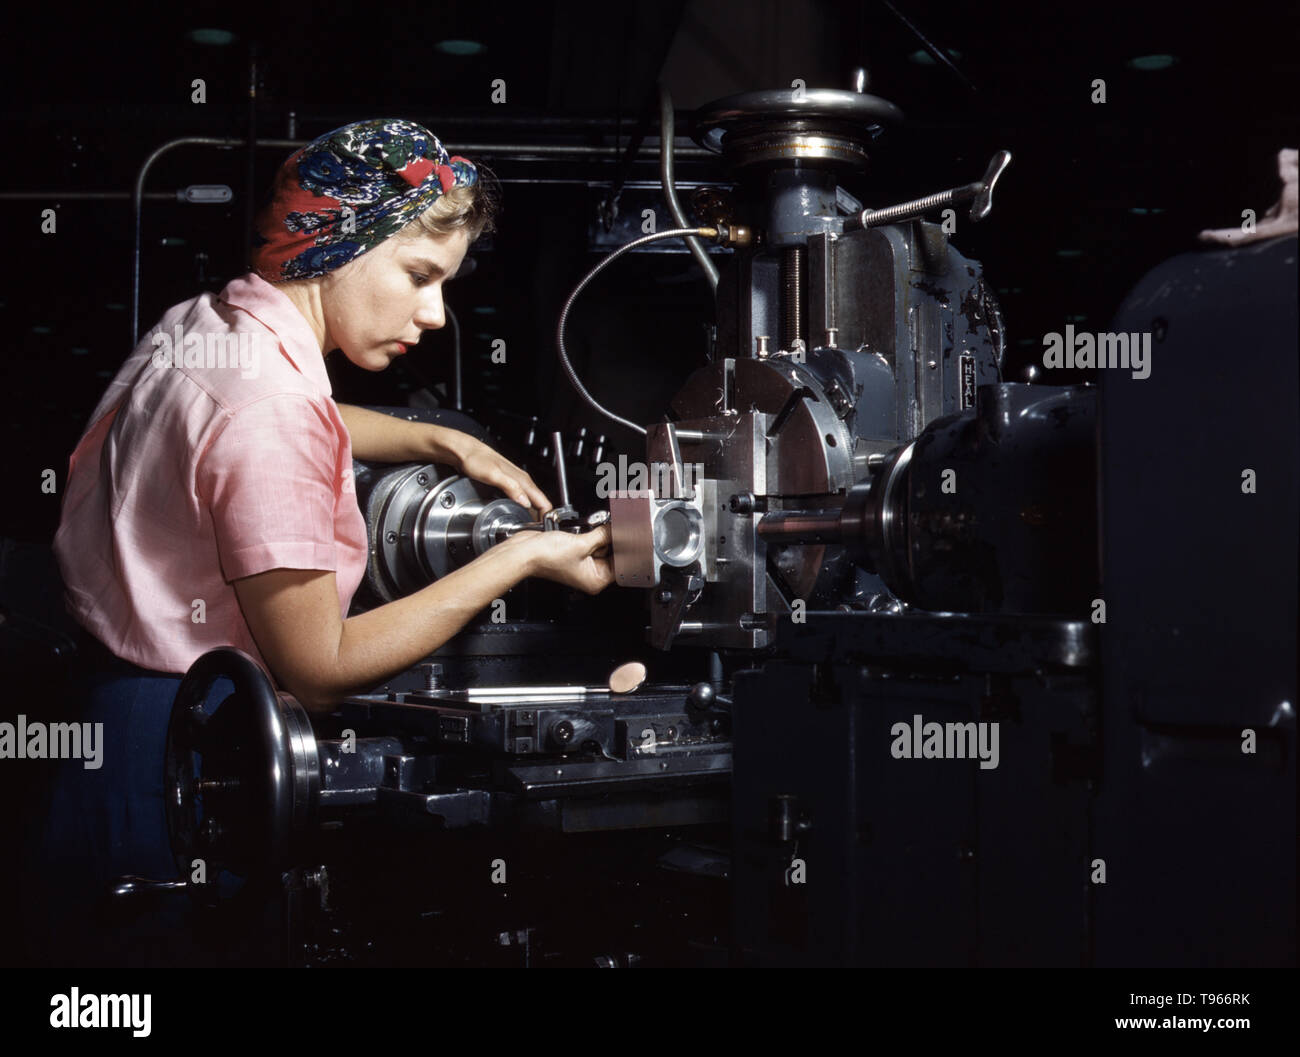 Woman machinist, Douglas Aircraft Company, Long Beach, California. Although the image of 'Rosie the Riveter' reflected the industrial work of welders and riveters, the majority of working women filled non-factory positions in every sector of the economy. What unified the experiences of these women was that they proved to themselves, and the country, that they could do a man's job  and could do it well. Photographed by Alfred T. Palmer, 1942. Stock Photo